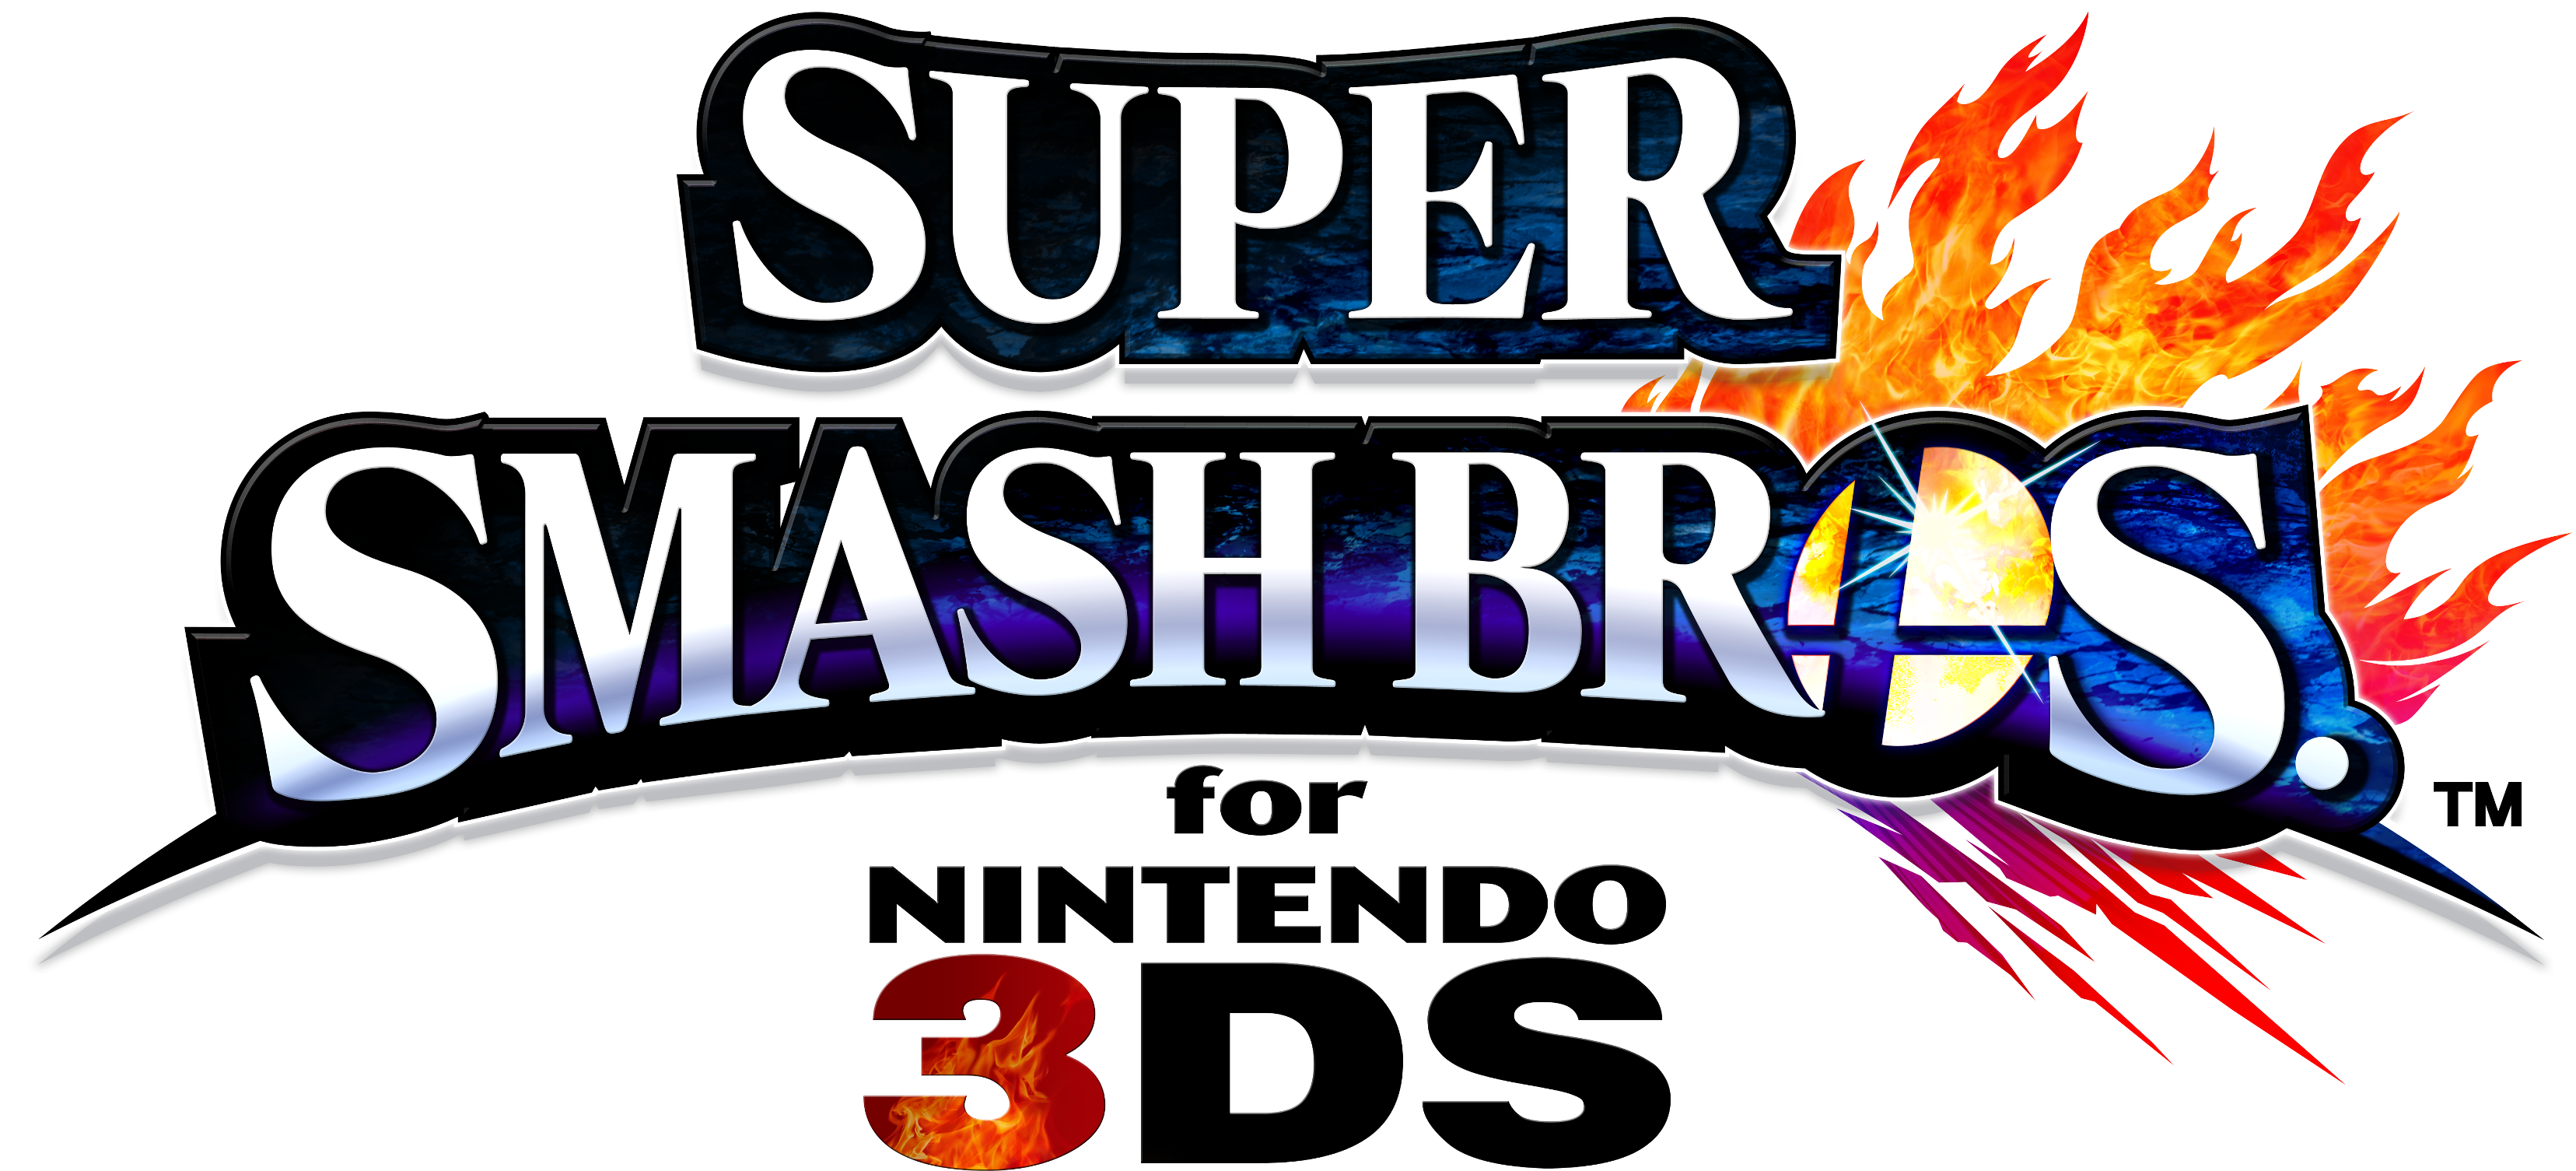 For Nintendo 3ds Sold More Than - Super Smash Bros. For Nintendo 3ds And Wii U (3312x1505)